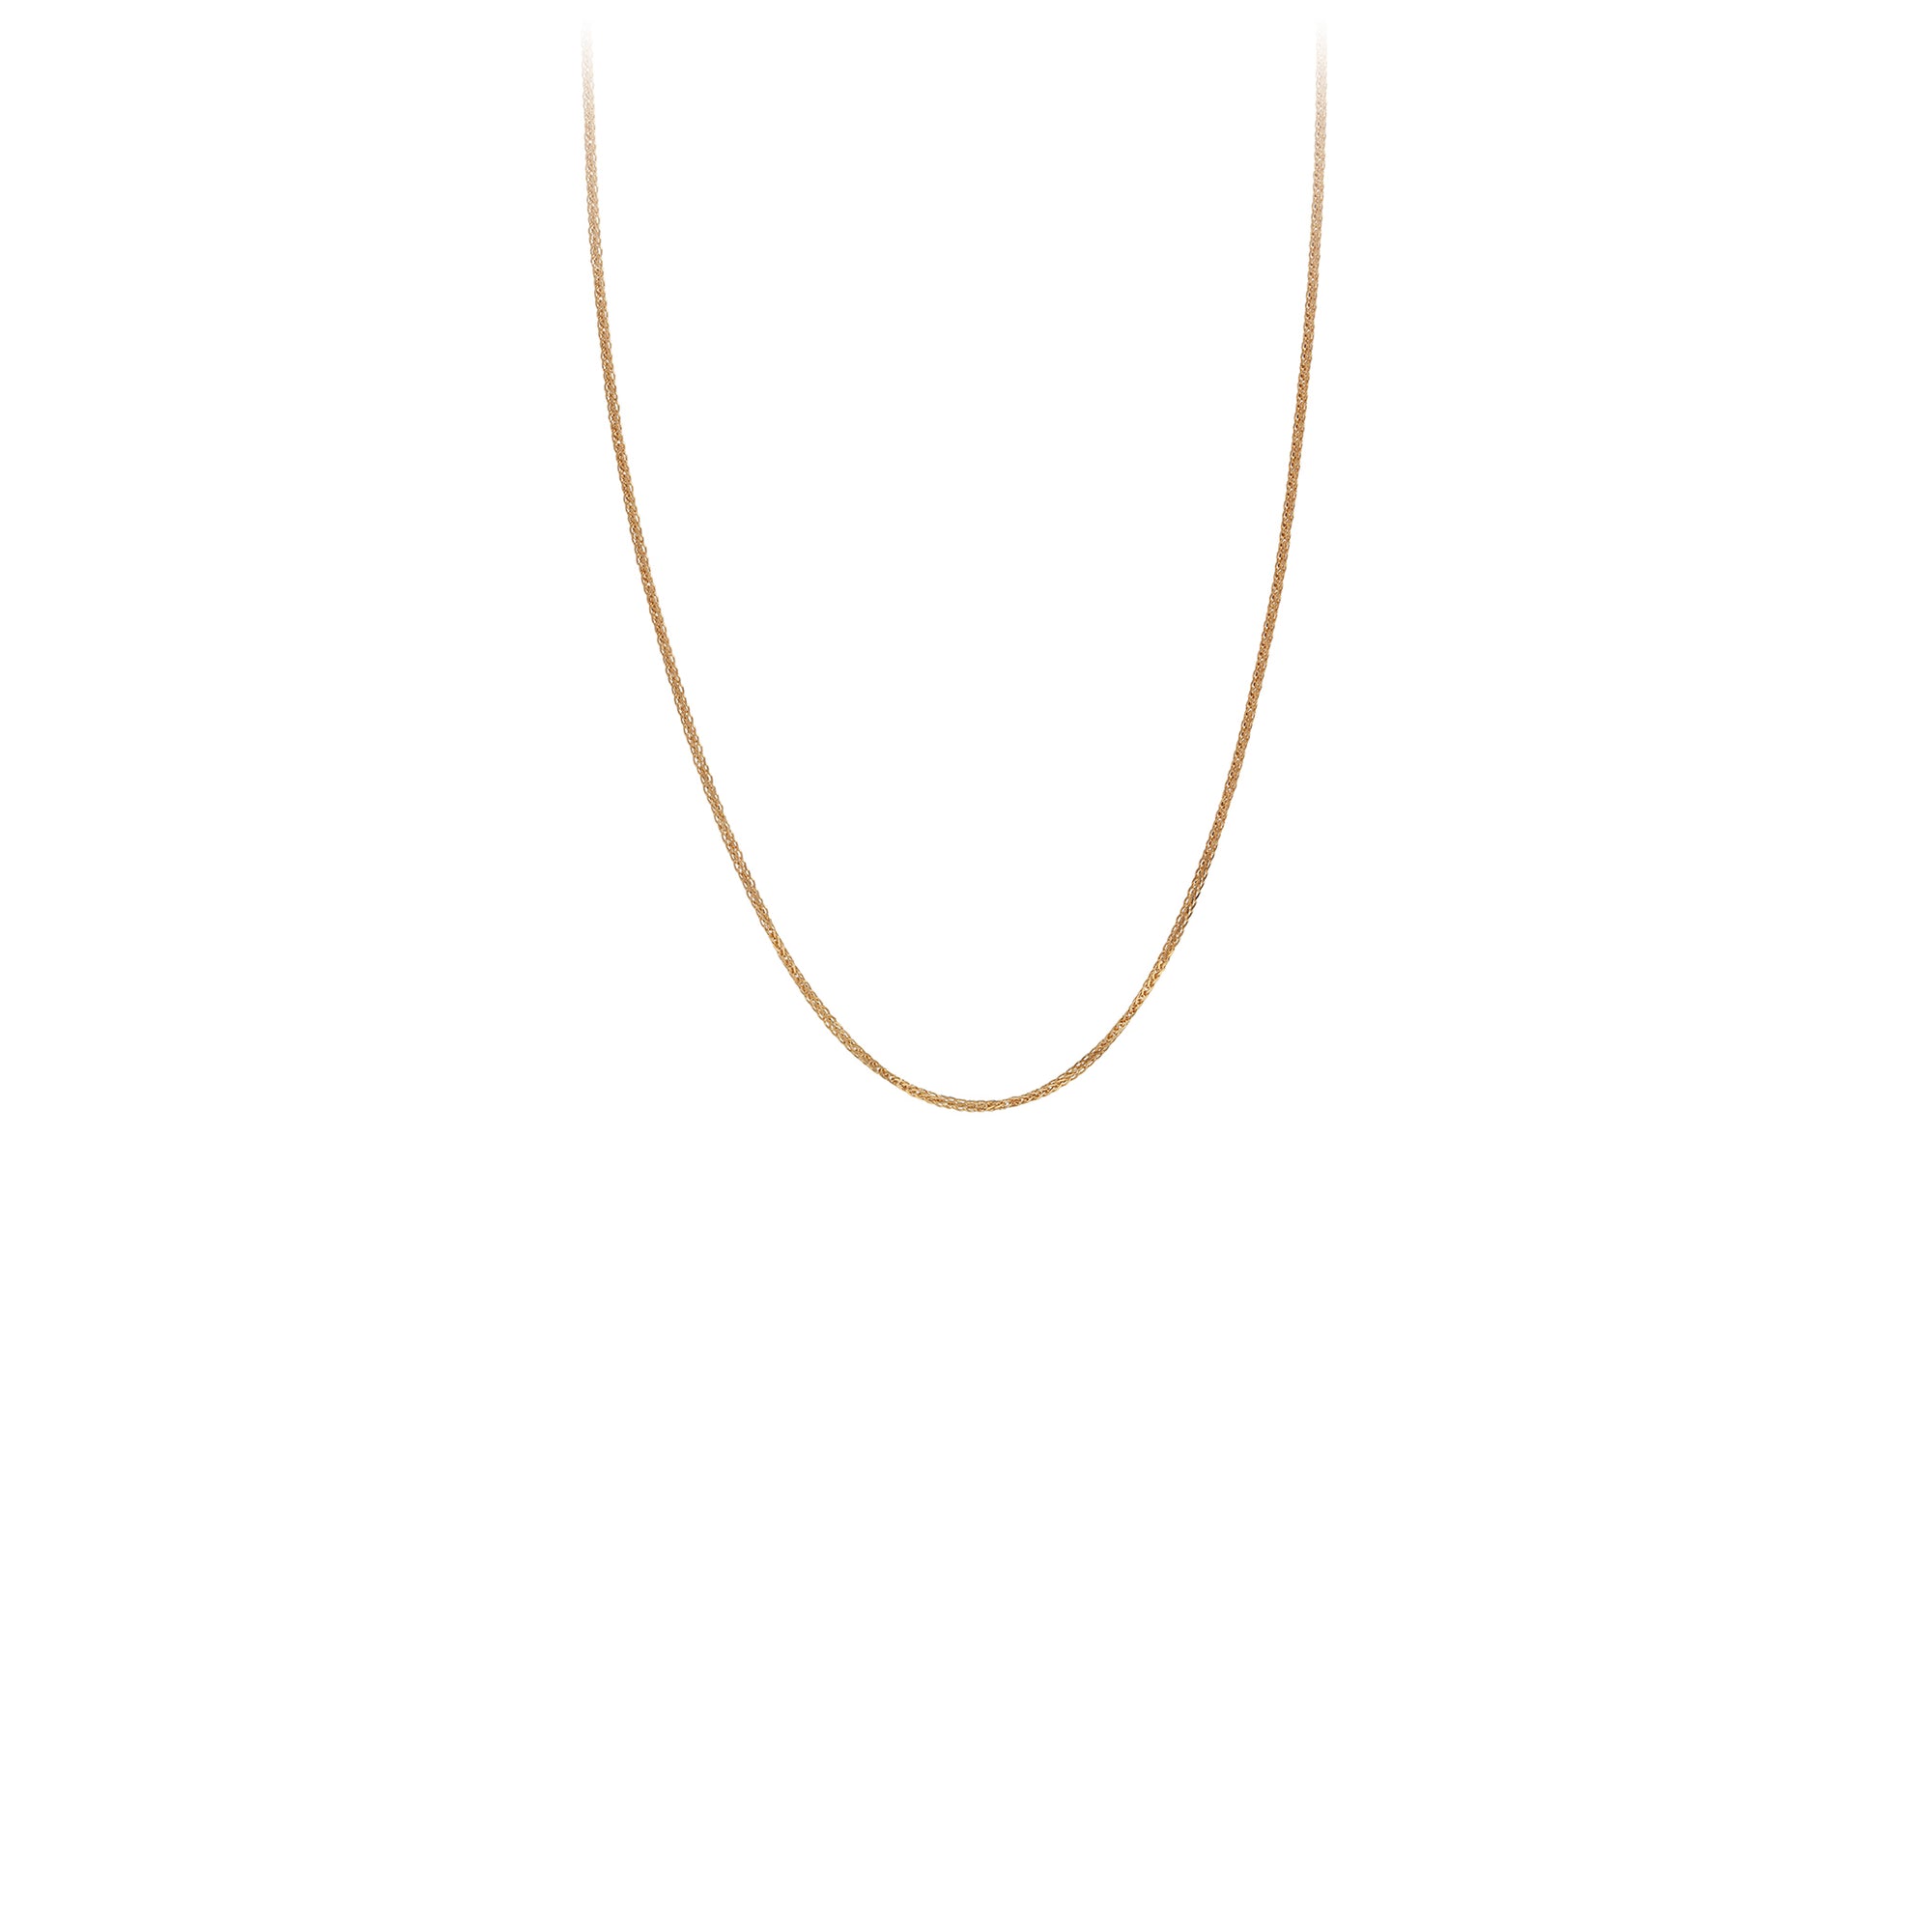 A 14 karat gold chain with diamond cut square wheat links